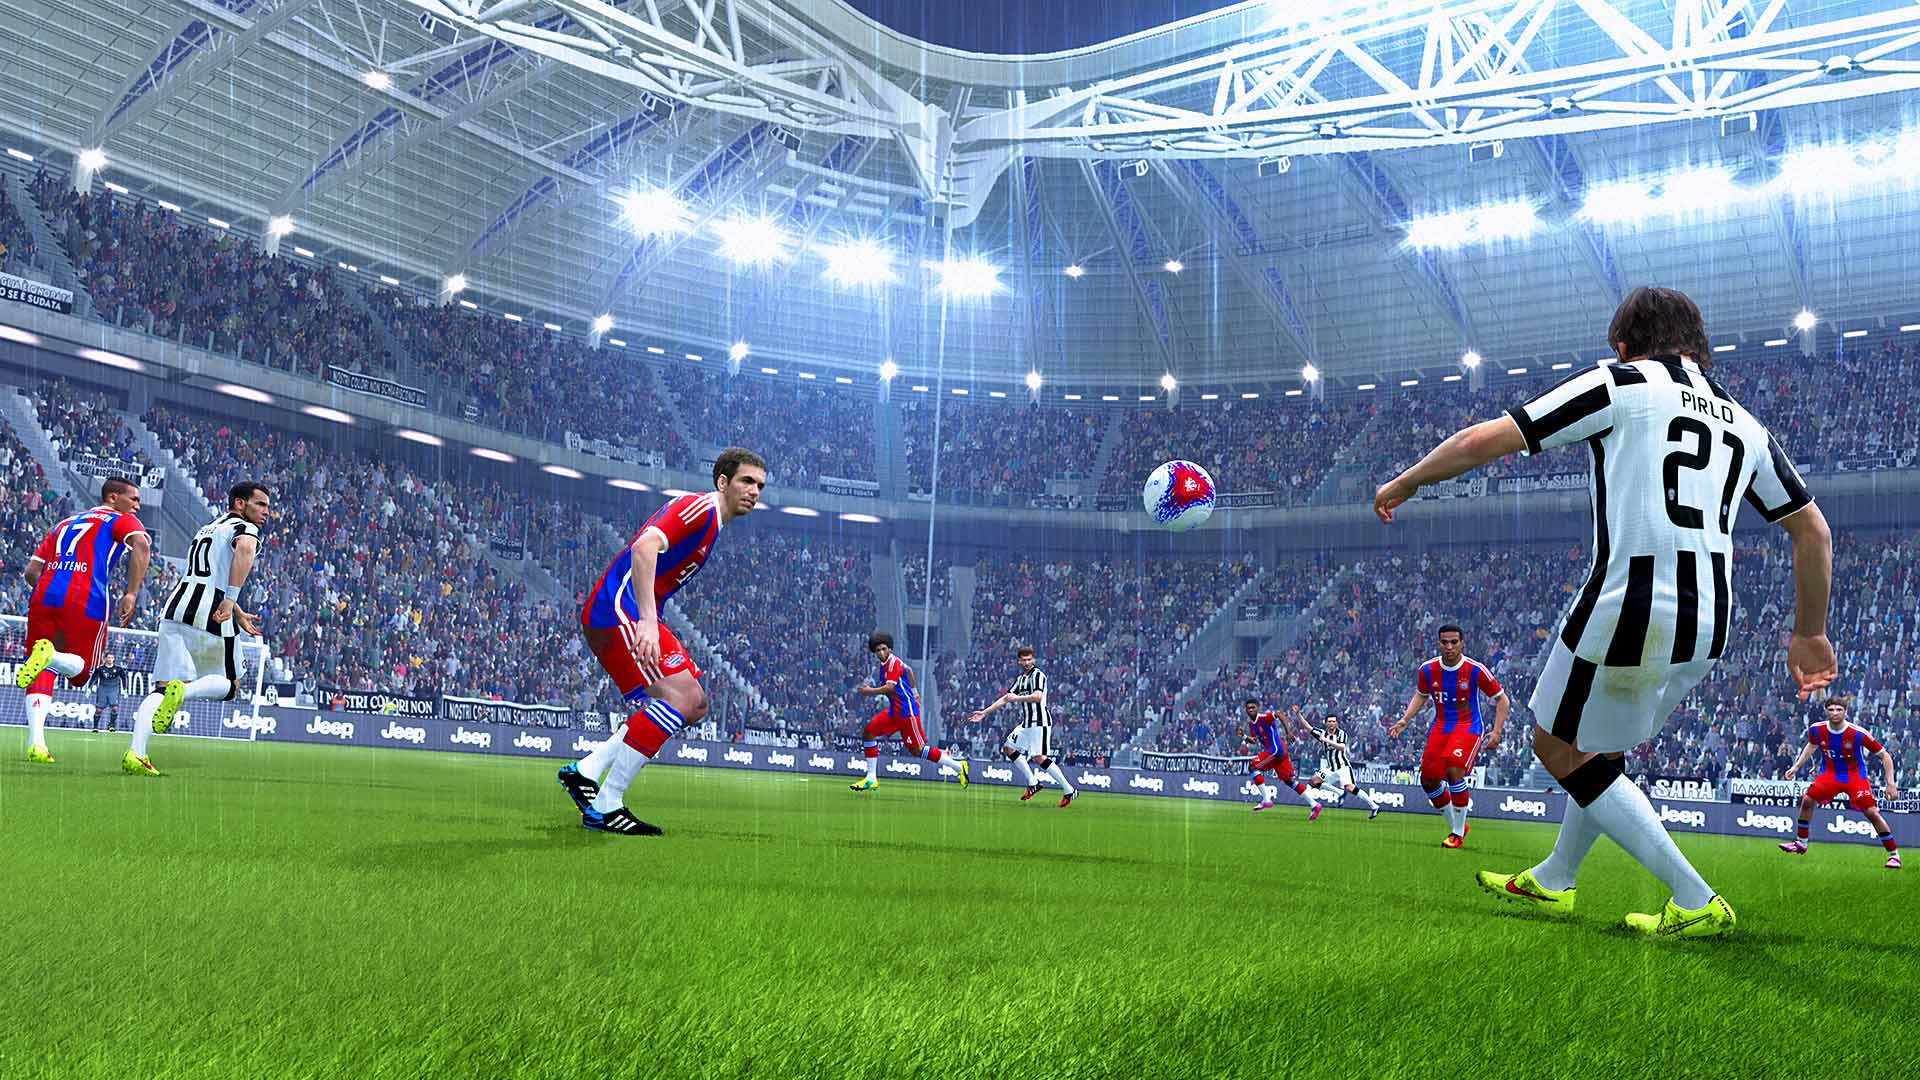 To win this game. World Soccer winning Eleven 2014. Pro Evolution Soccer 2015. Pro Evolution Soccer 2014. Футбол 2015.